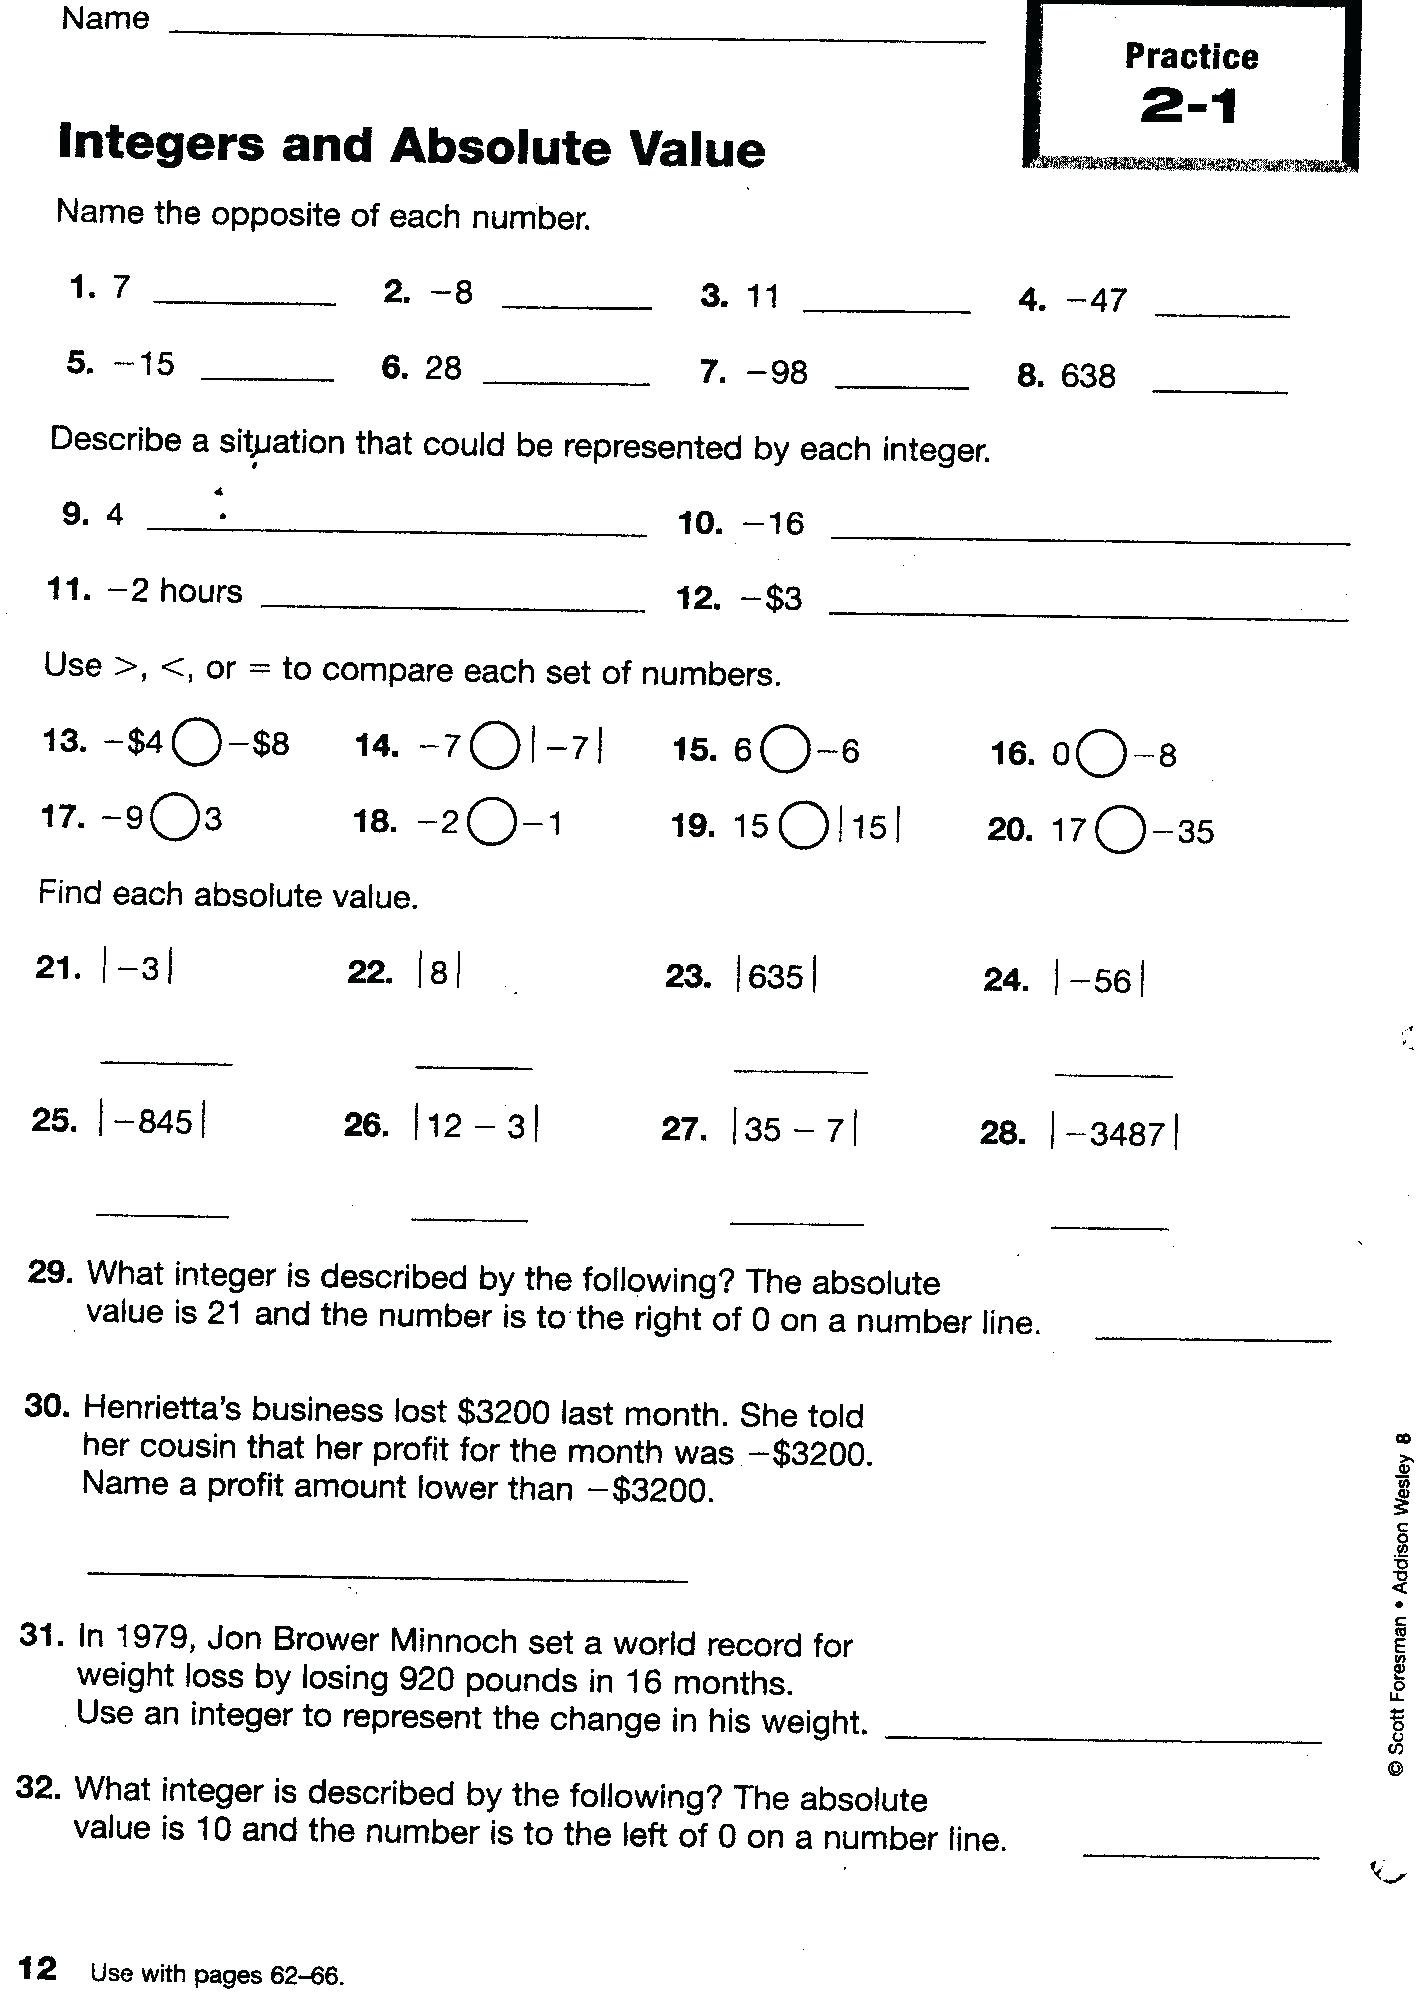 012 Ged Math Word Problems Printable Pratice Fascinating Practice Pertaining To Free Printable Ged Worksheets